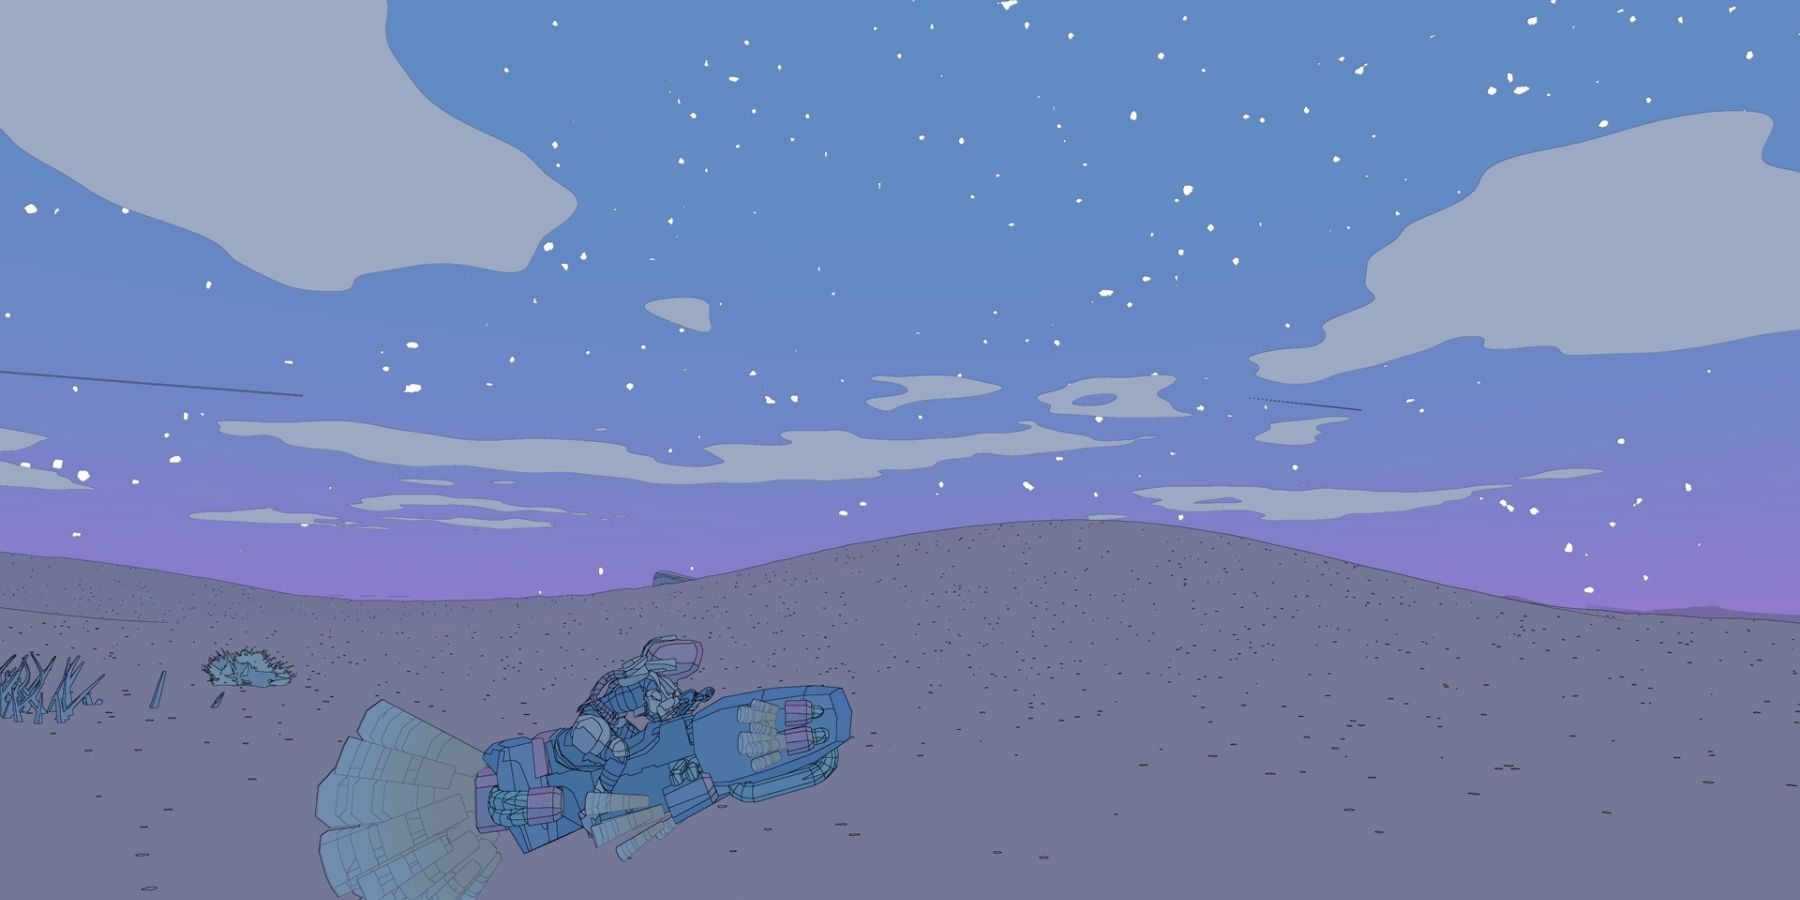 Sable in foreground on jetbike in front of a sand dune and blue/purple night sky